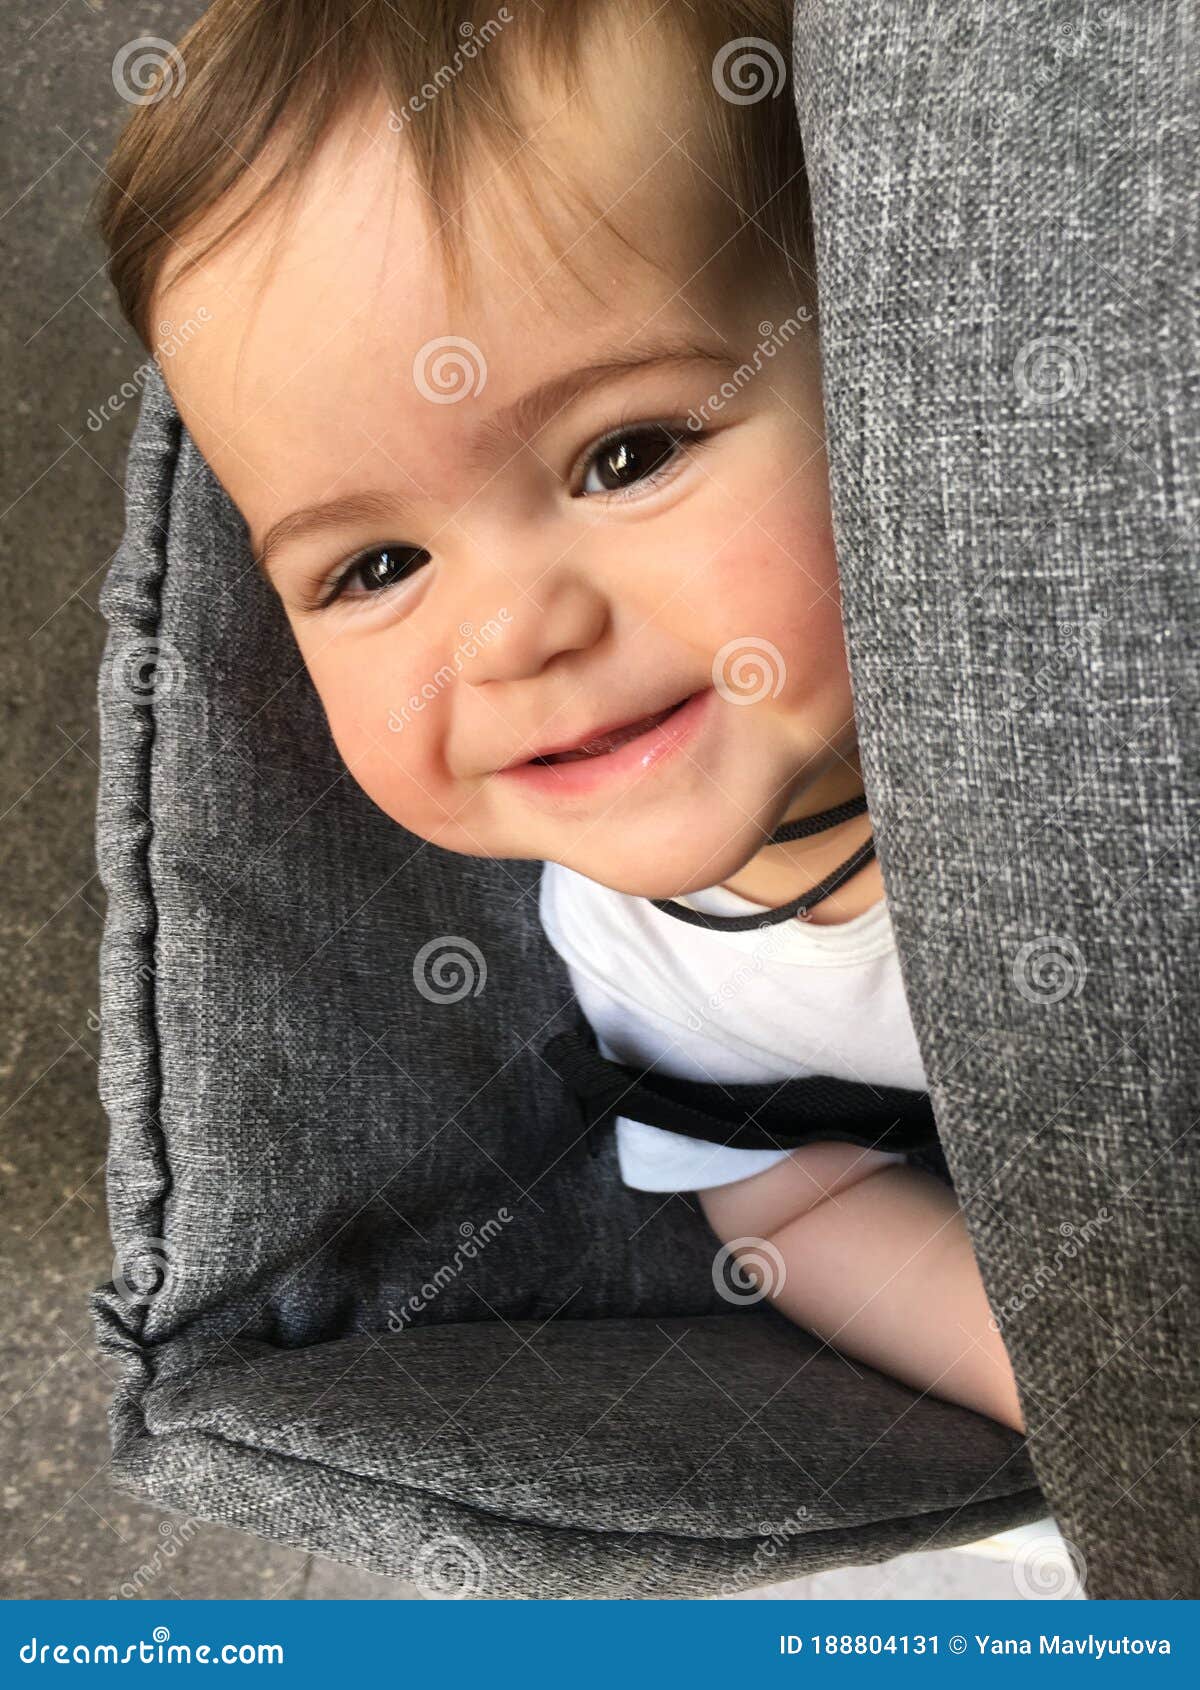 Cute Small White Skin with Light Brown Hair Eleven Months Baby Kid with  Funny Smile on Face Looking Up Laughing, Little Child with Stock Image -  Image of child, adorable: 188804131